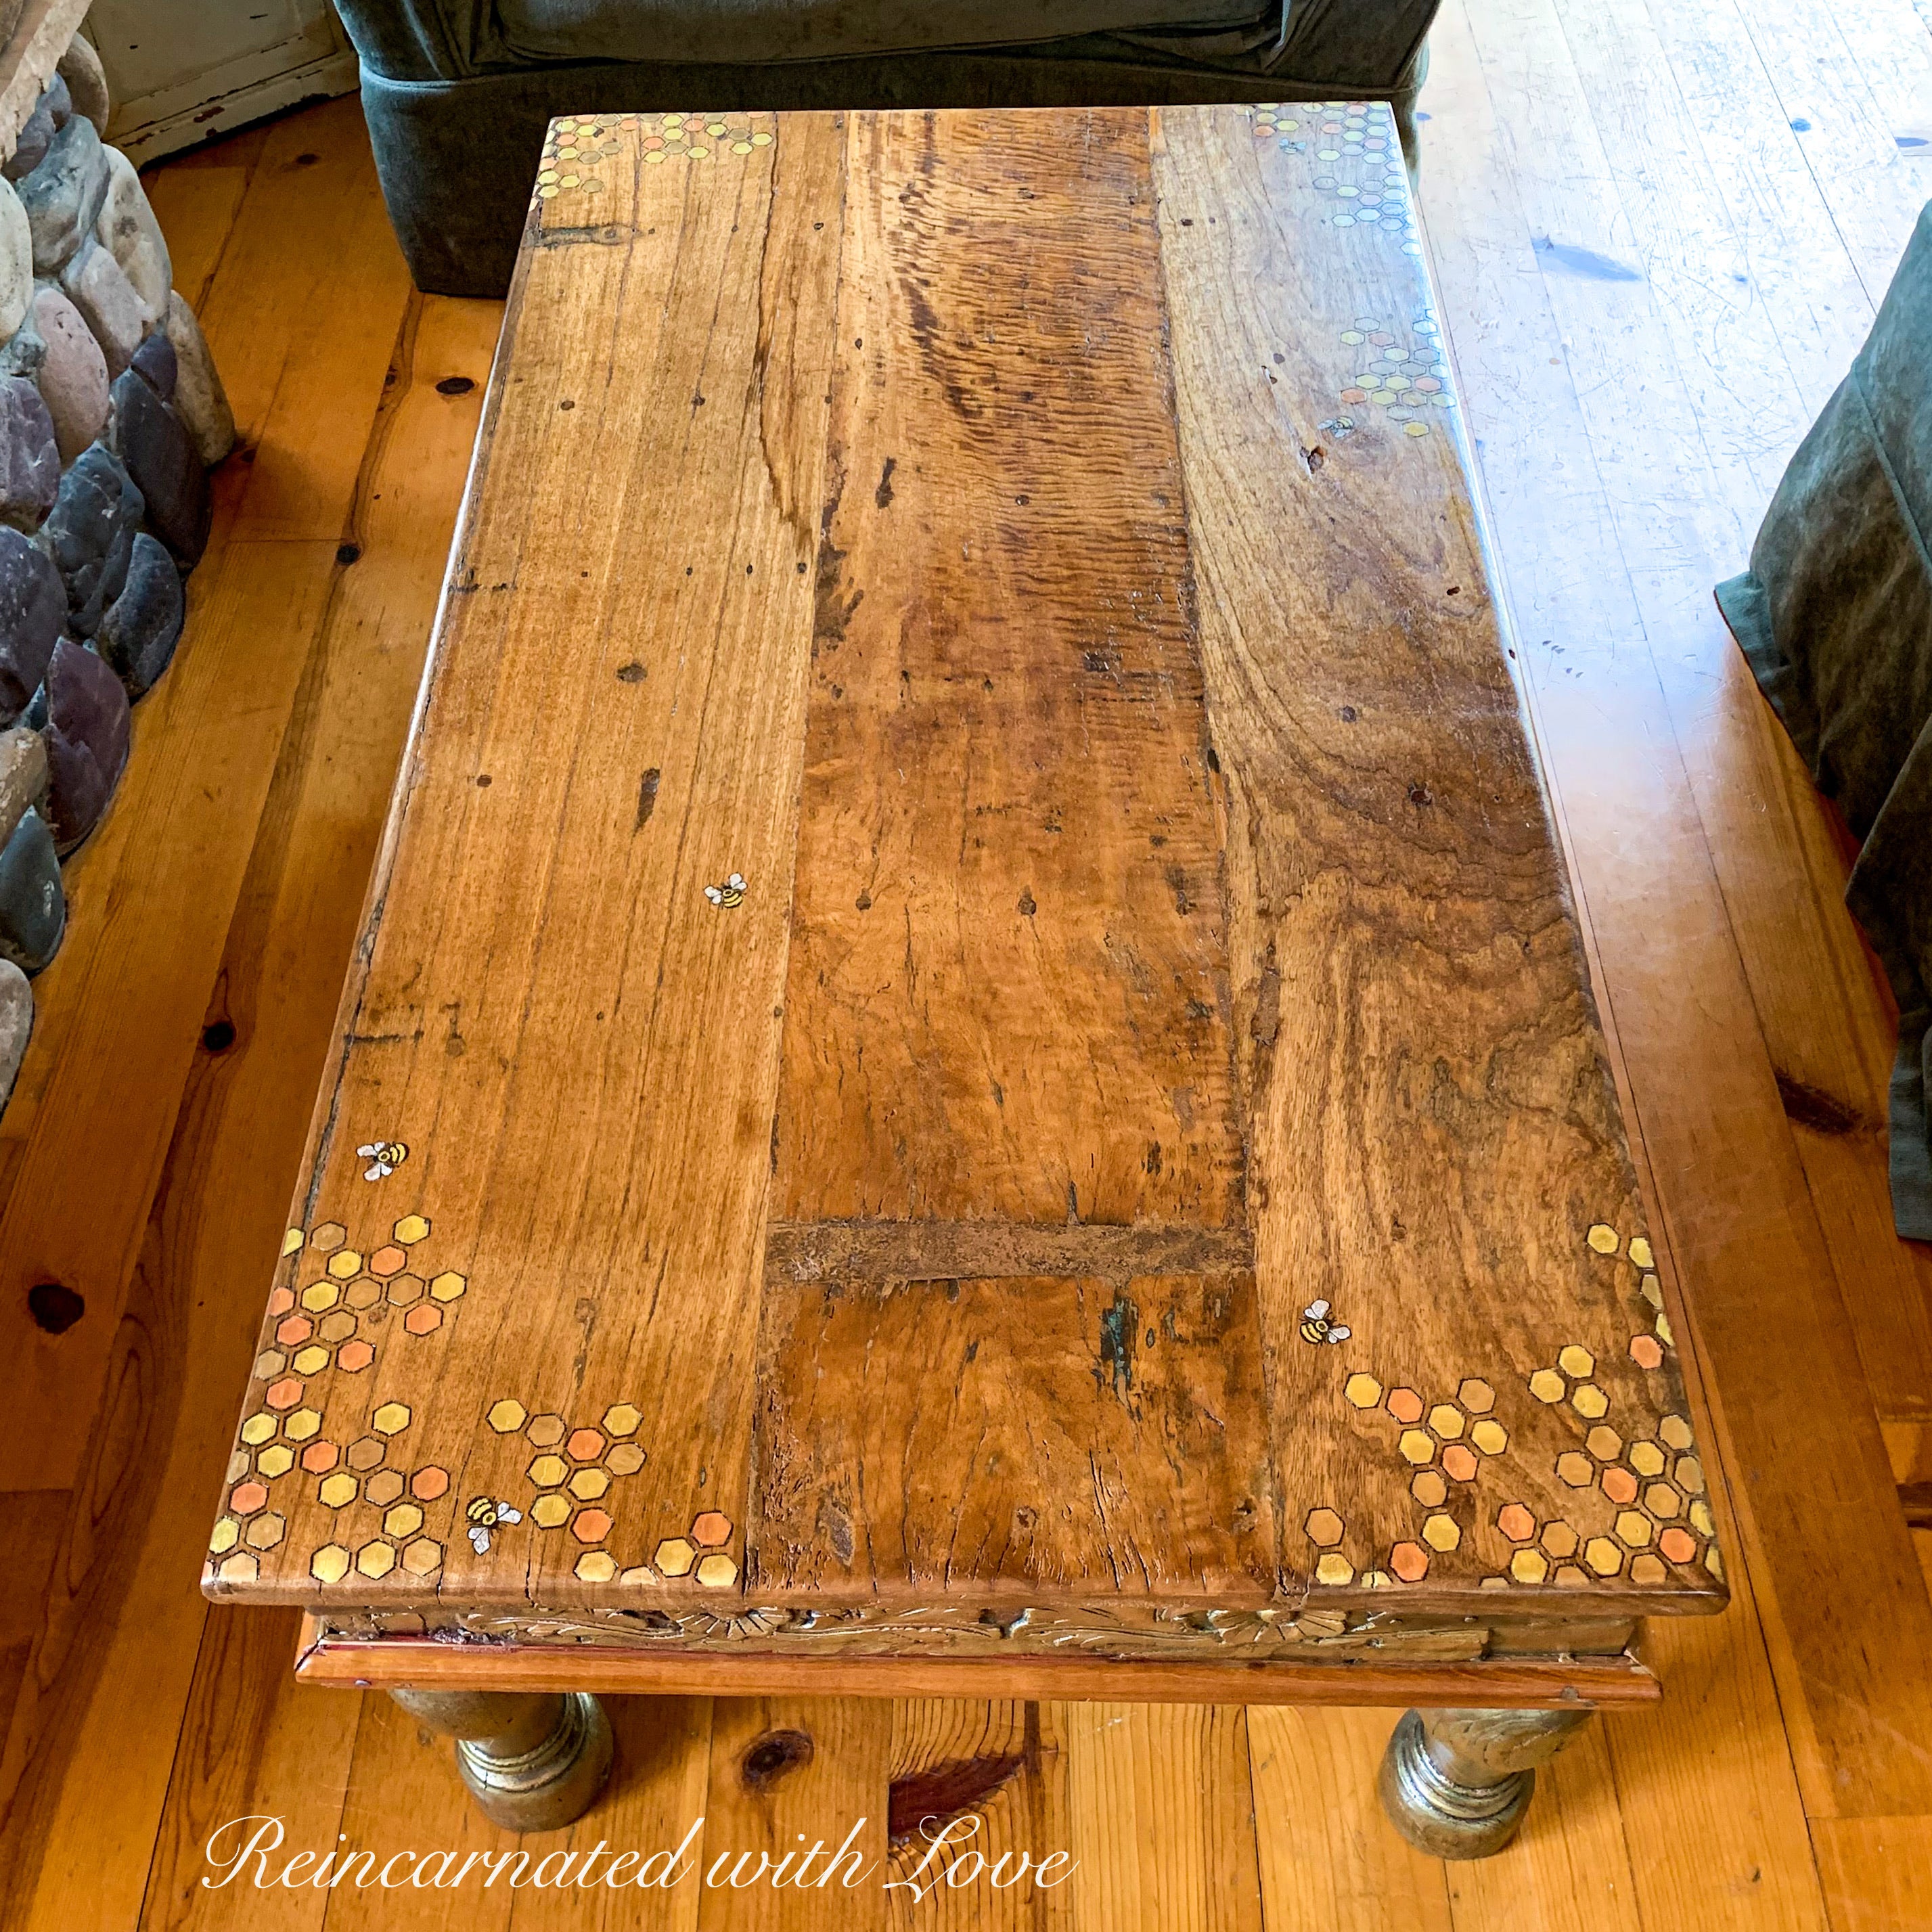 A reclaimed wood coffee tabletop with honeycomb & tiny bee accents burnt into the woodgrain.